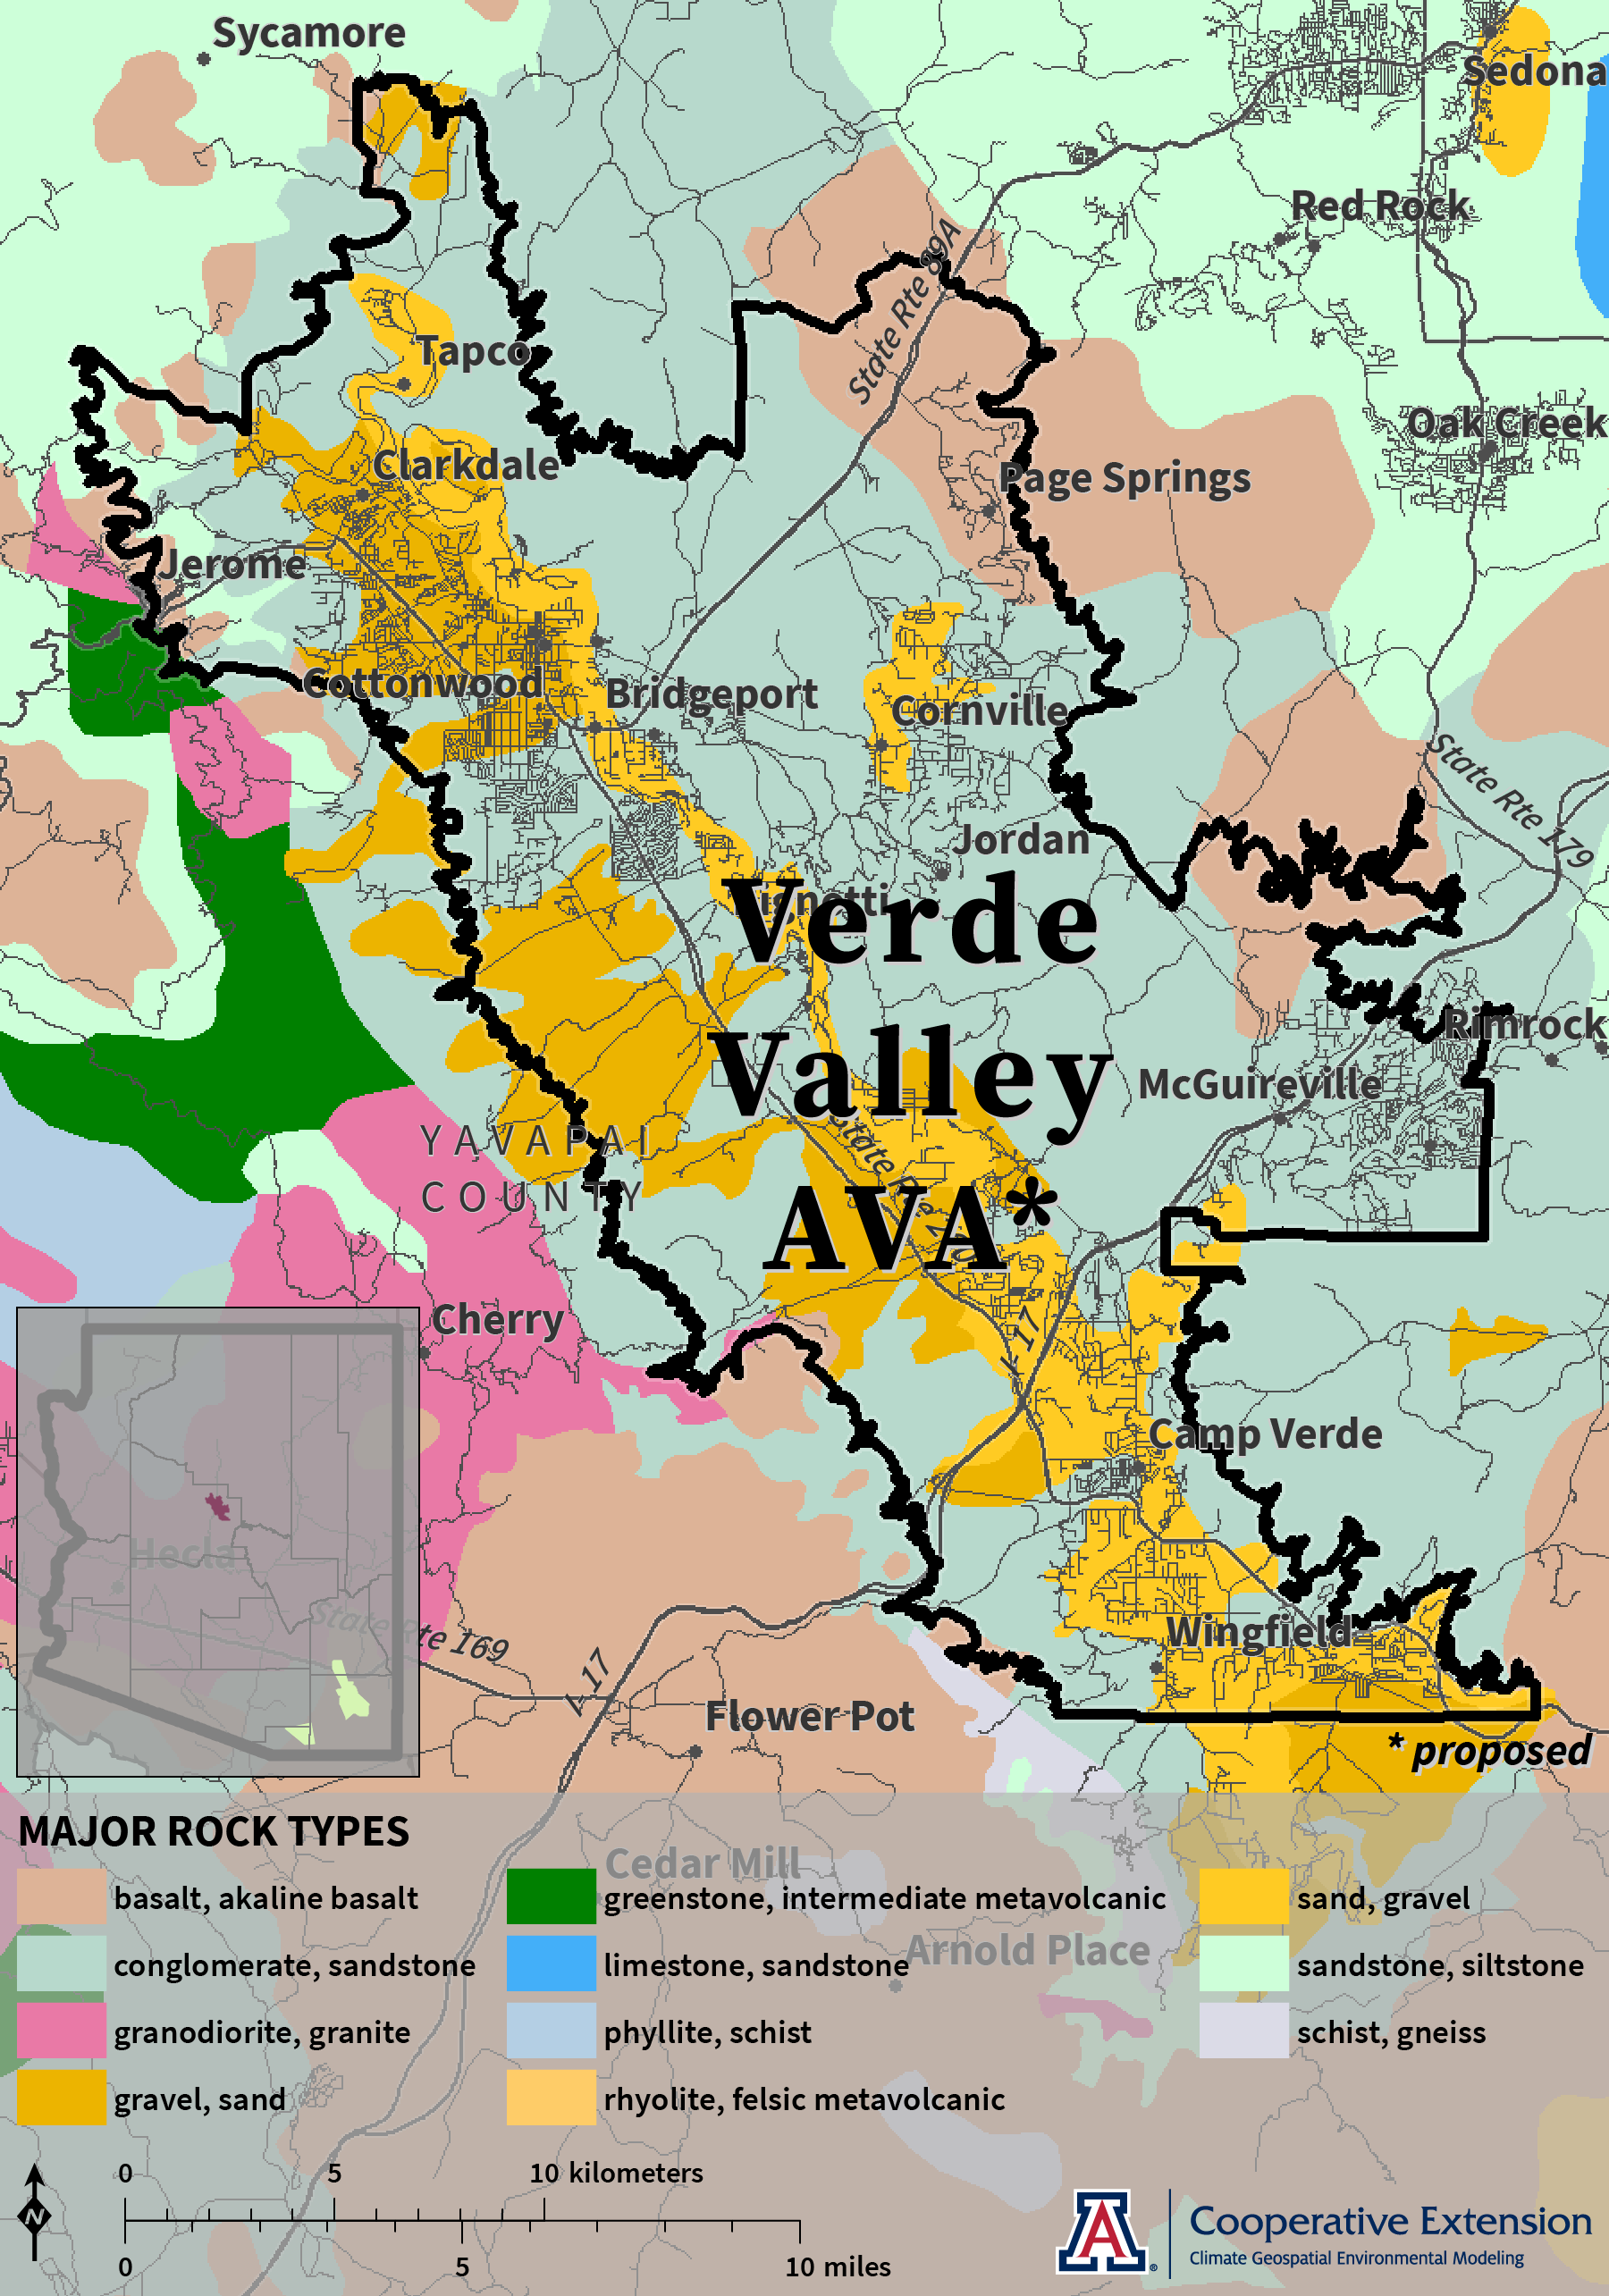 map of major rock types for proposed Verde Valley AVA